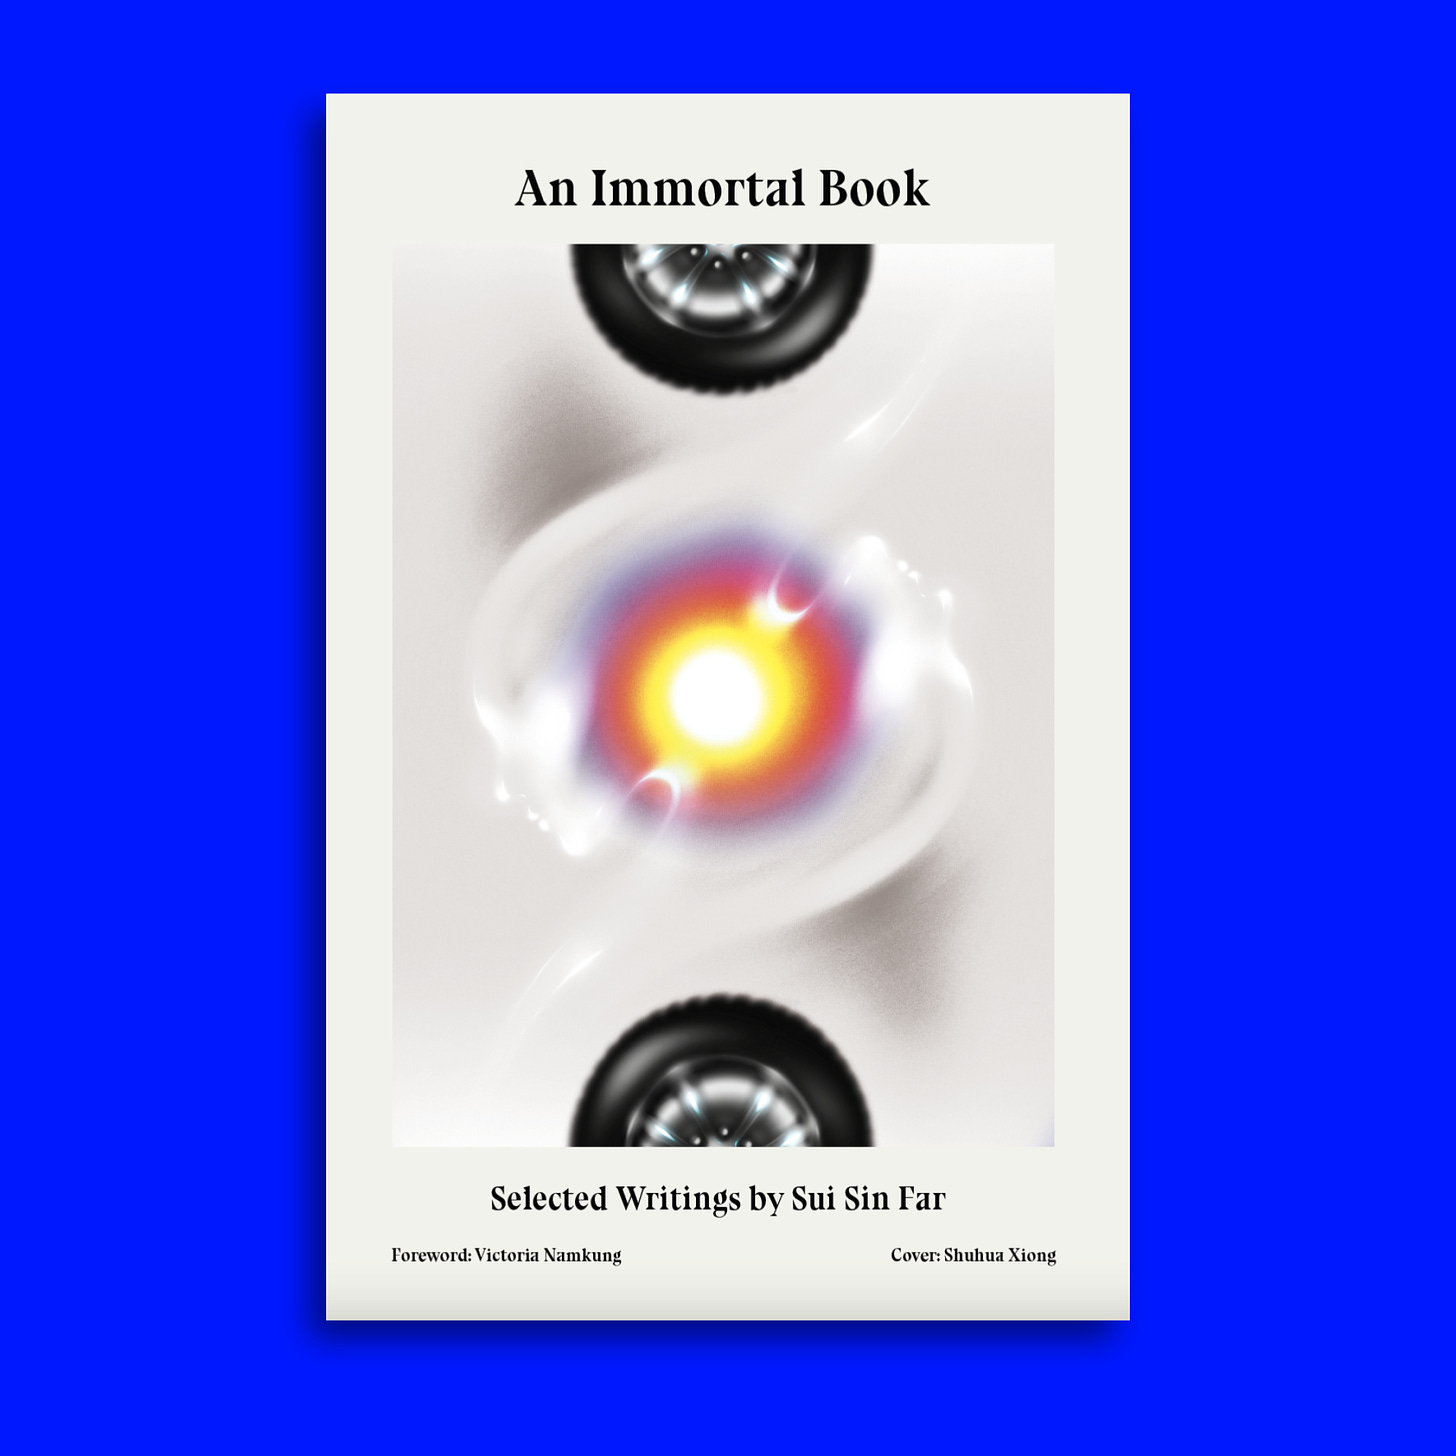 Cover illustration for An Immortal Book, featuring ghostly faces in profile swirling around a colorful orb; framed by wheels